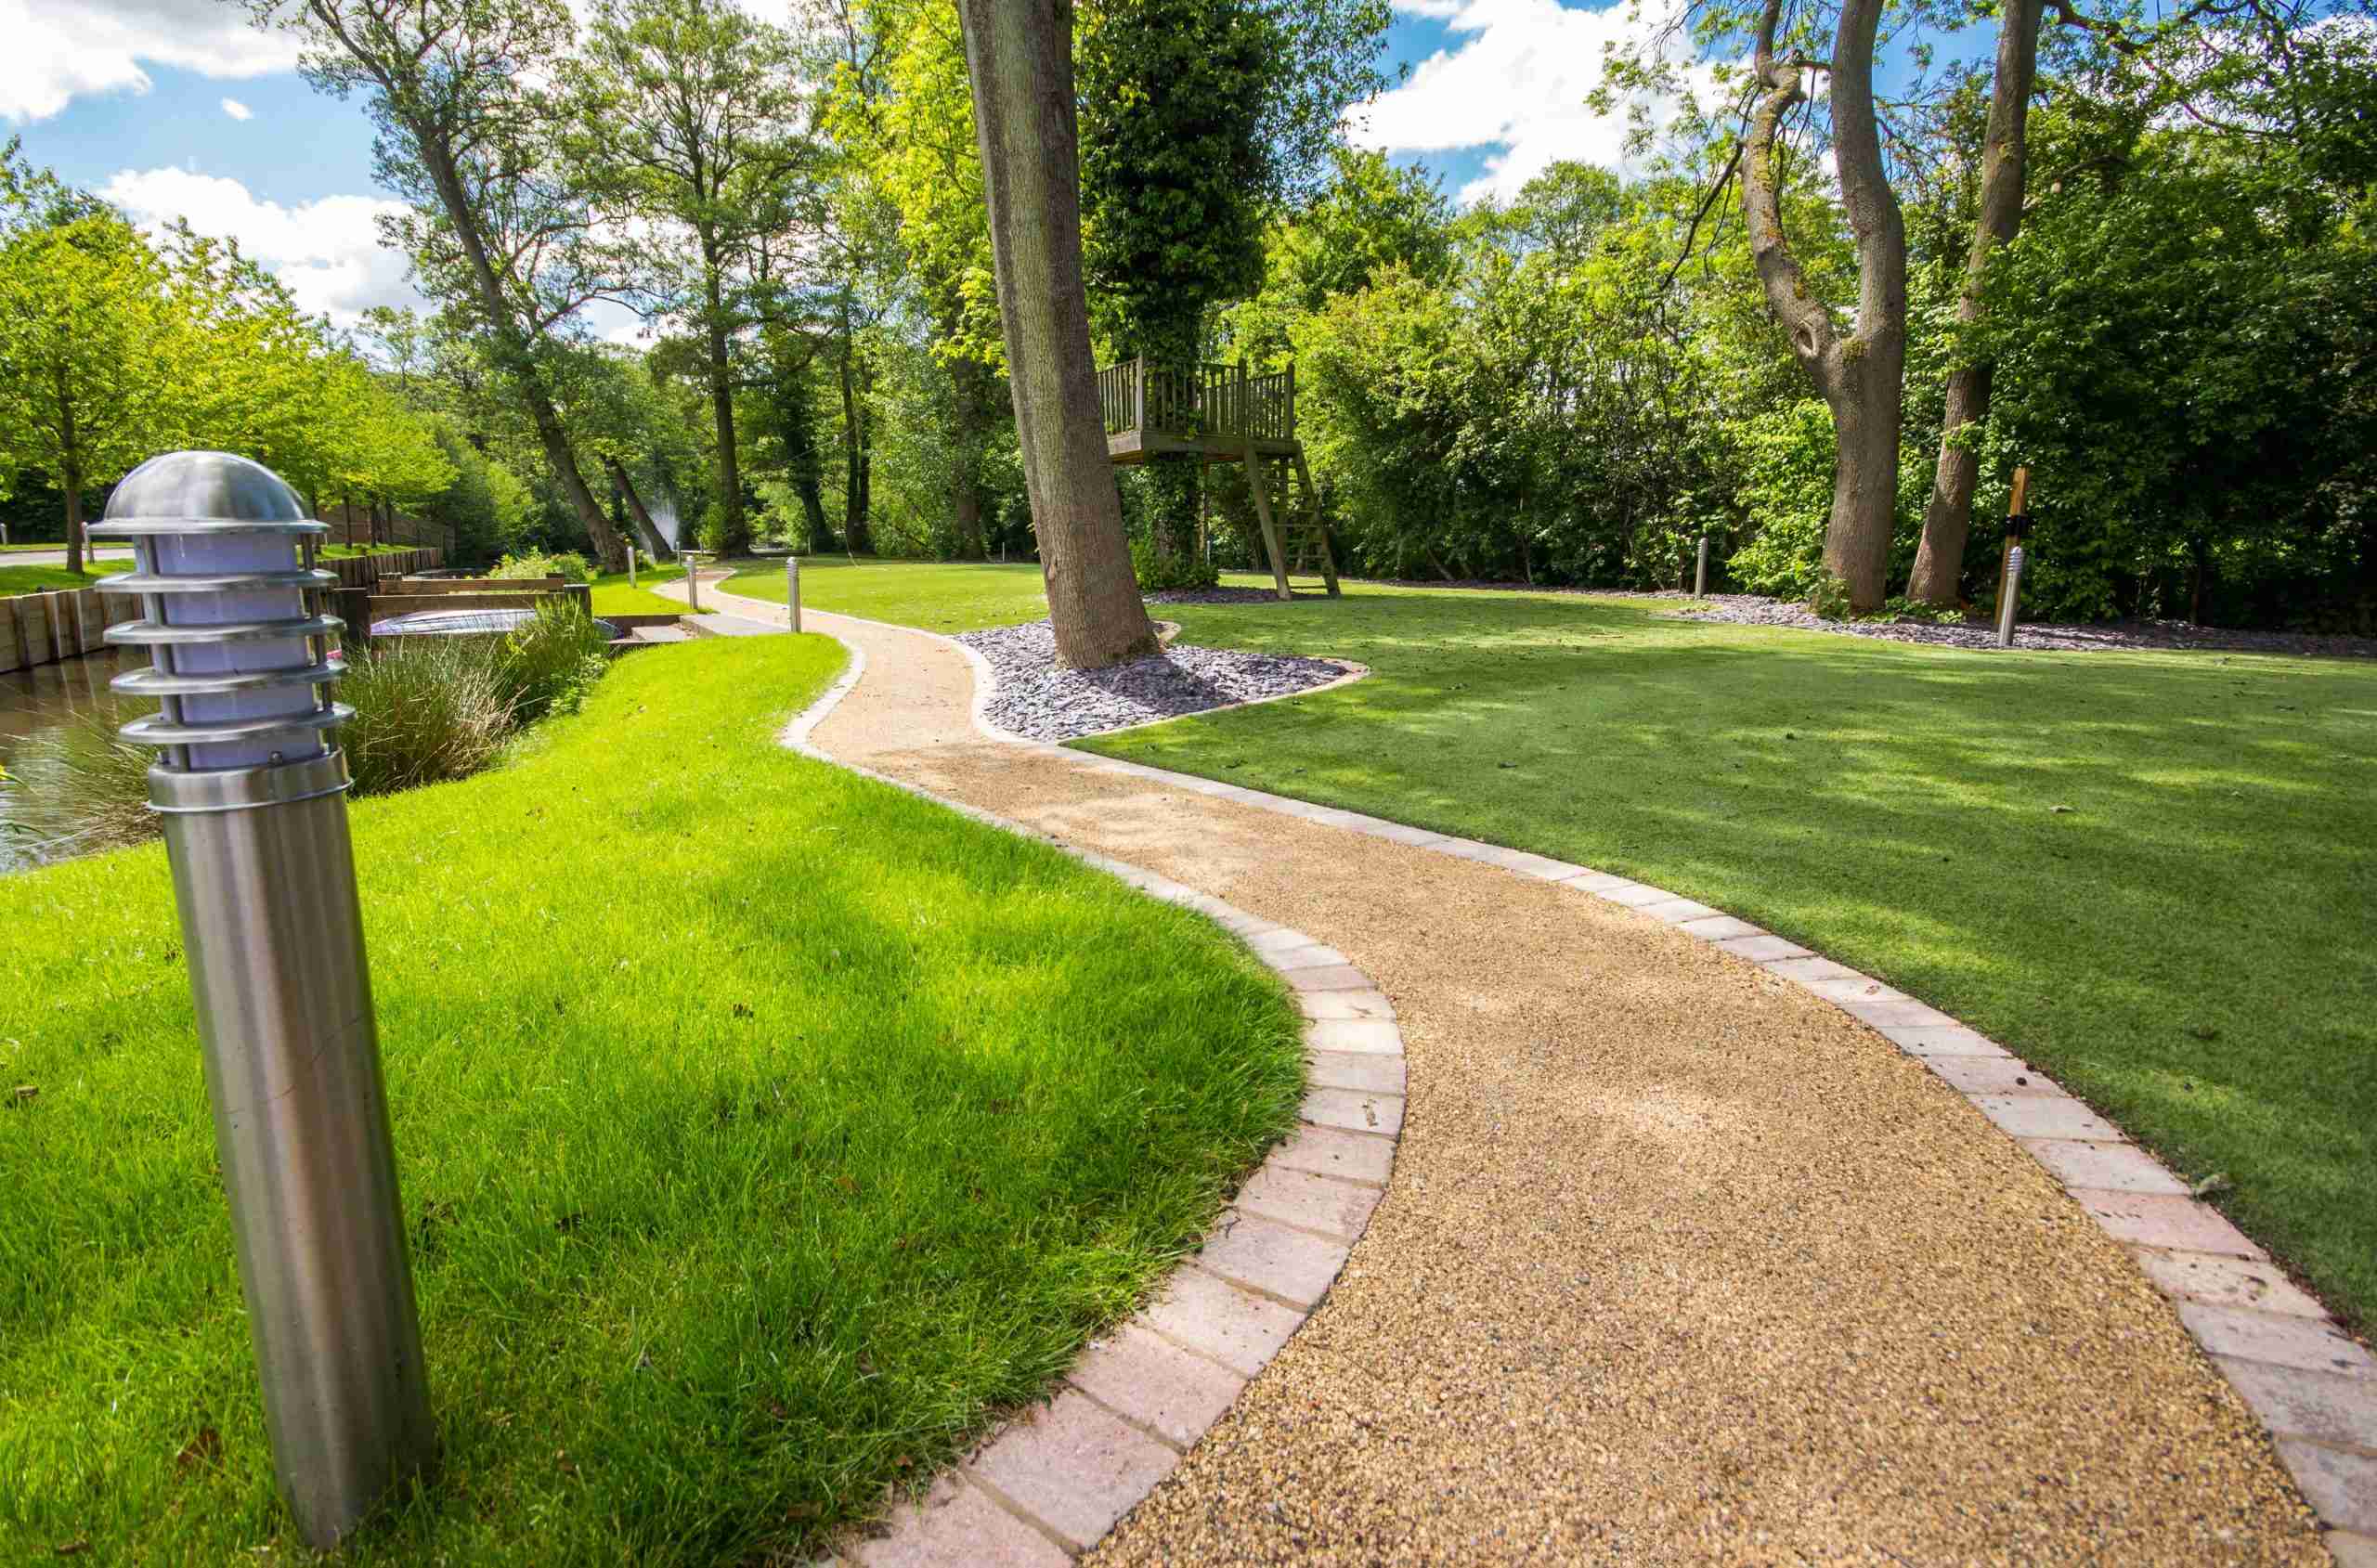 Providers Of Resin Bonded Surfaces For Hard Landscaping Near Me